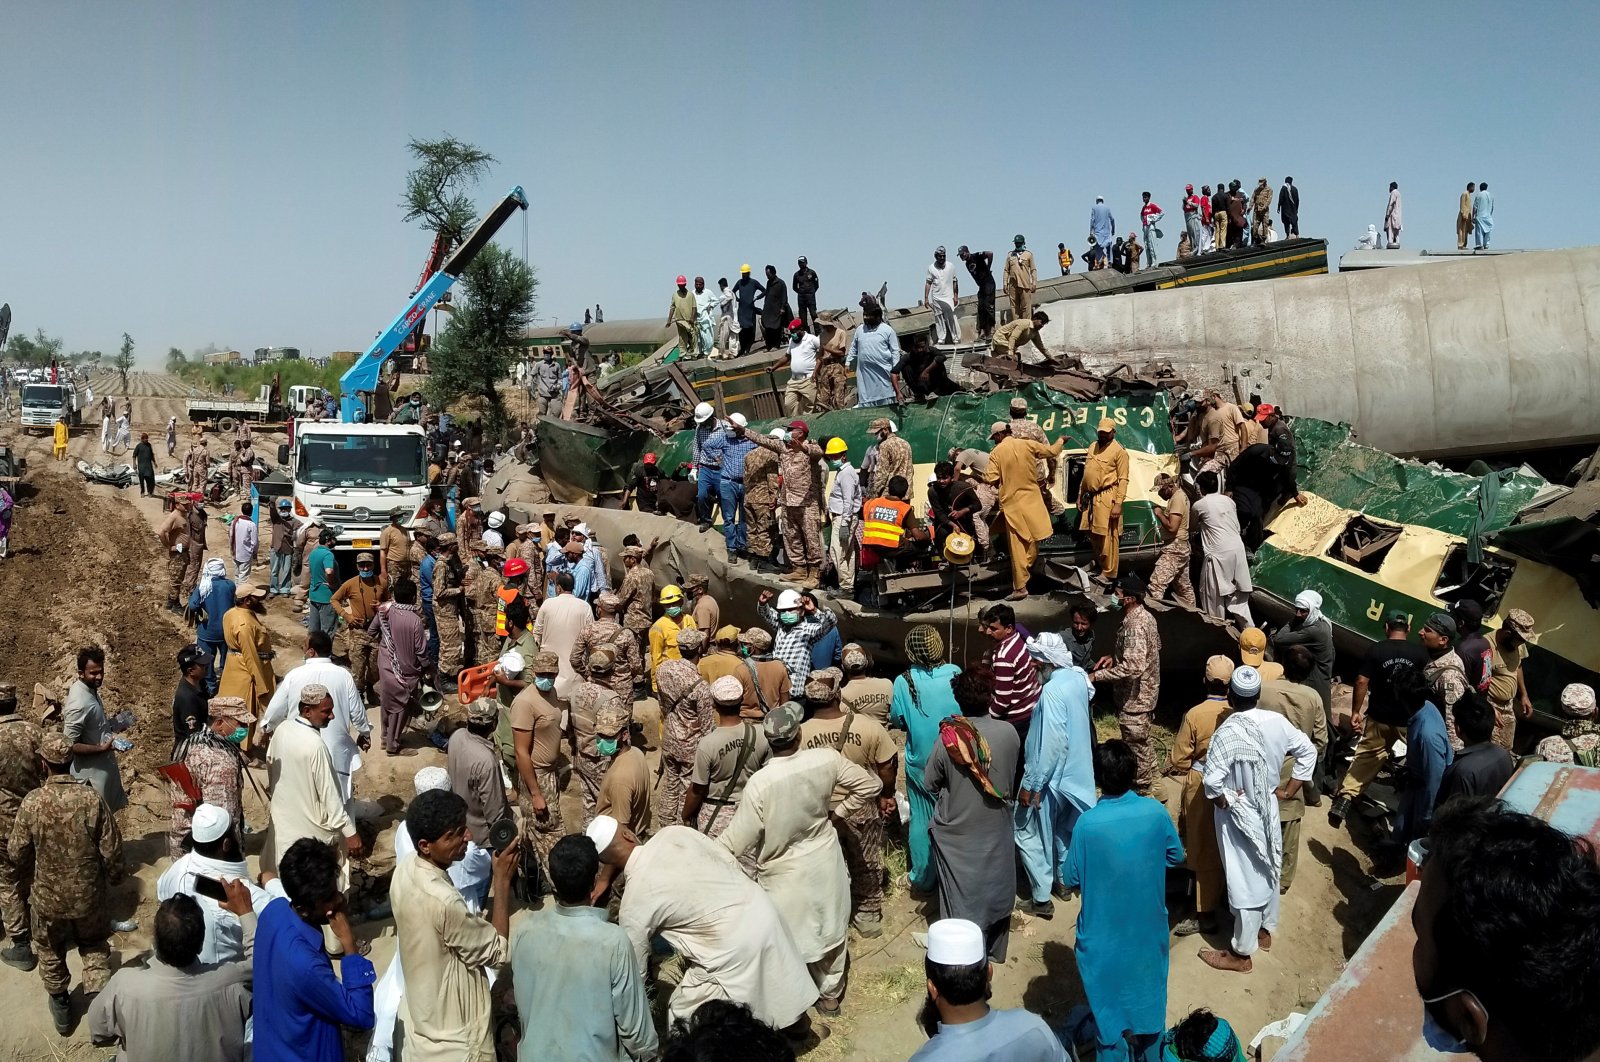 Paramilitary soldiers and rescue workers gather at the site following a collision between two trains in Ghotki, Pakistan June 7, 2021. (Reuters Photo)